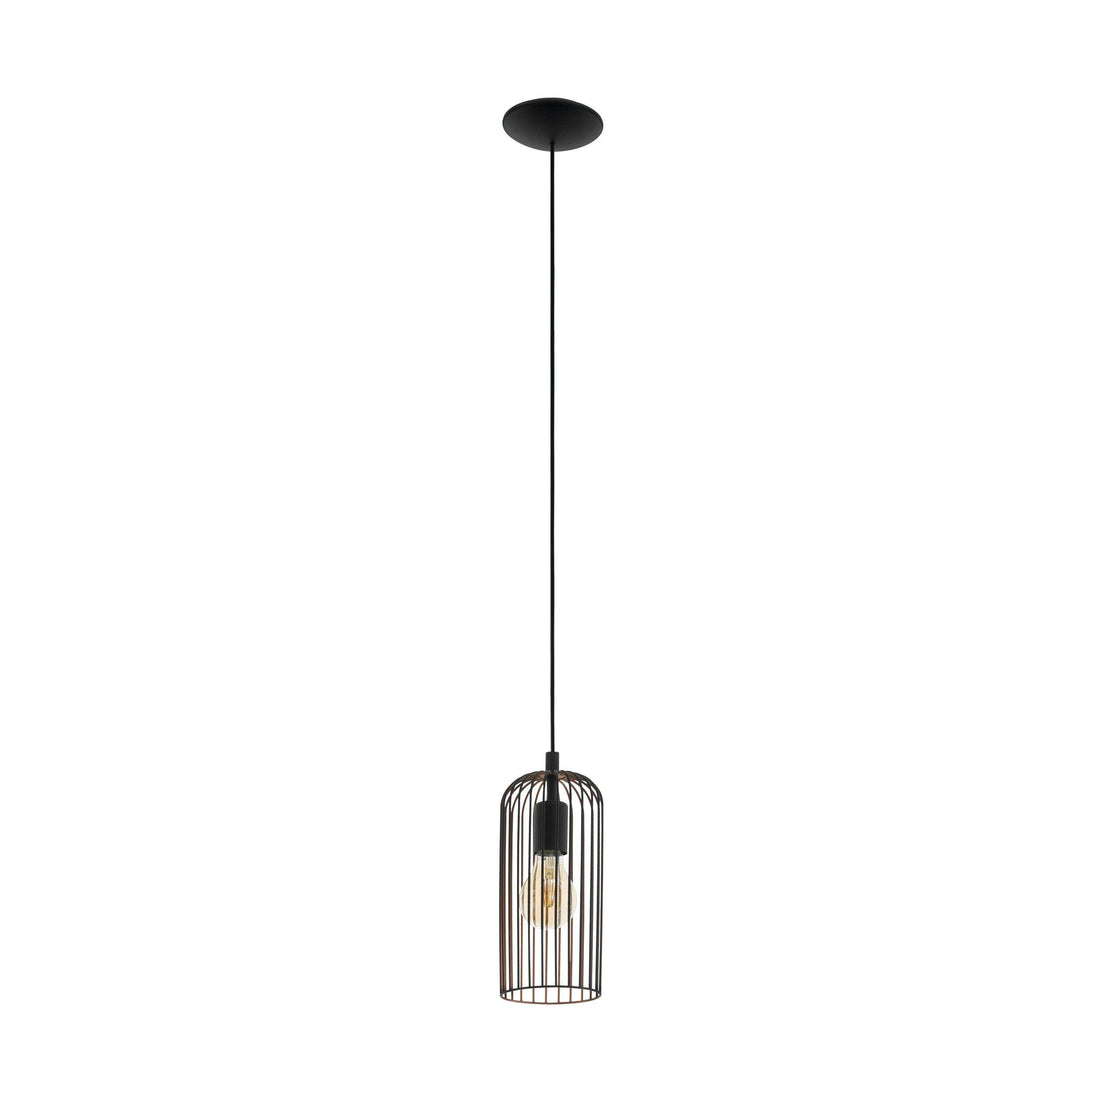 ROCCAMENA Pendant Light by The Light Library